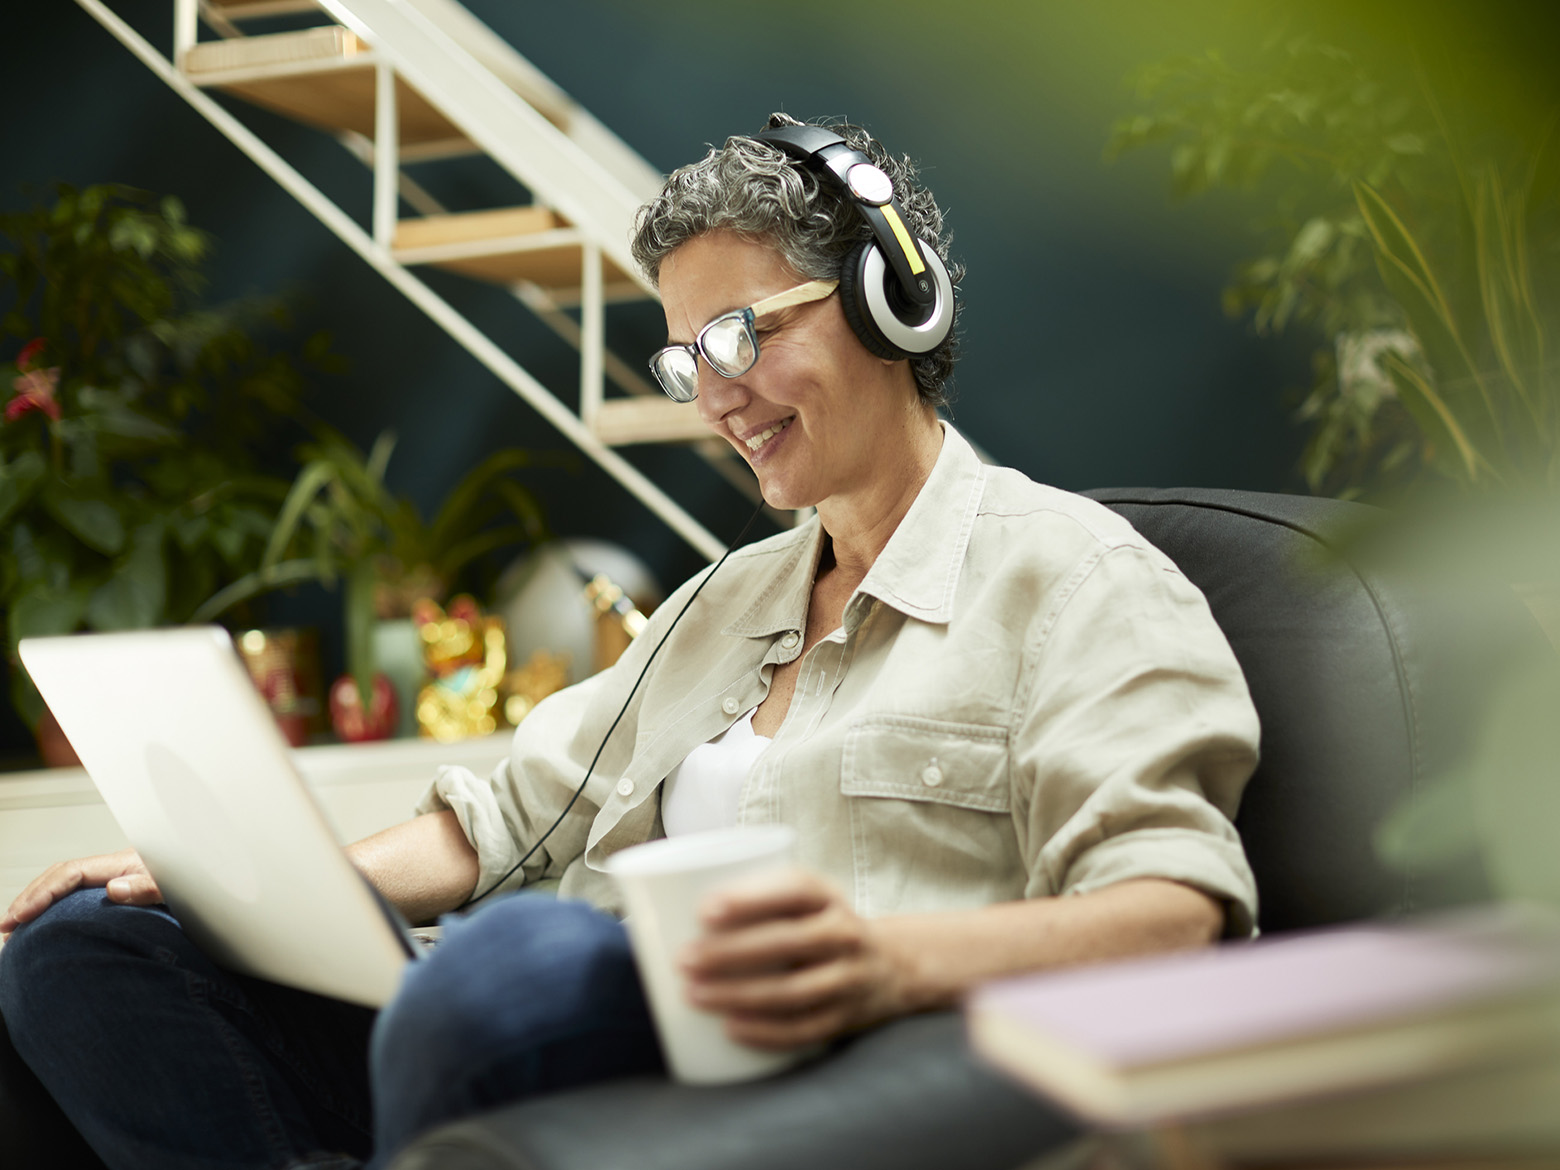 A woman sits with headphones on plugged into her laptop